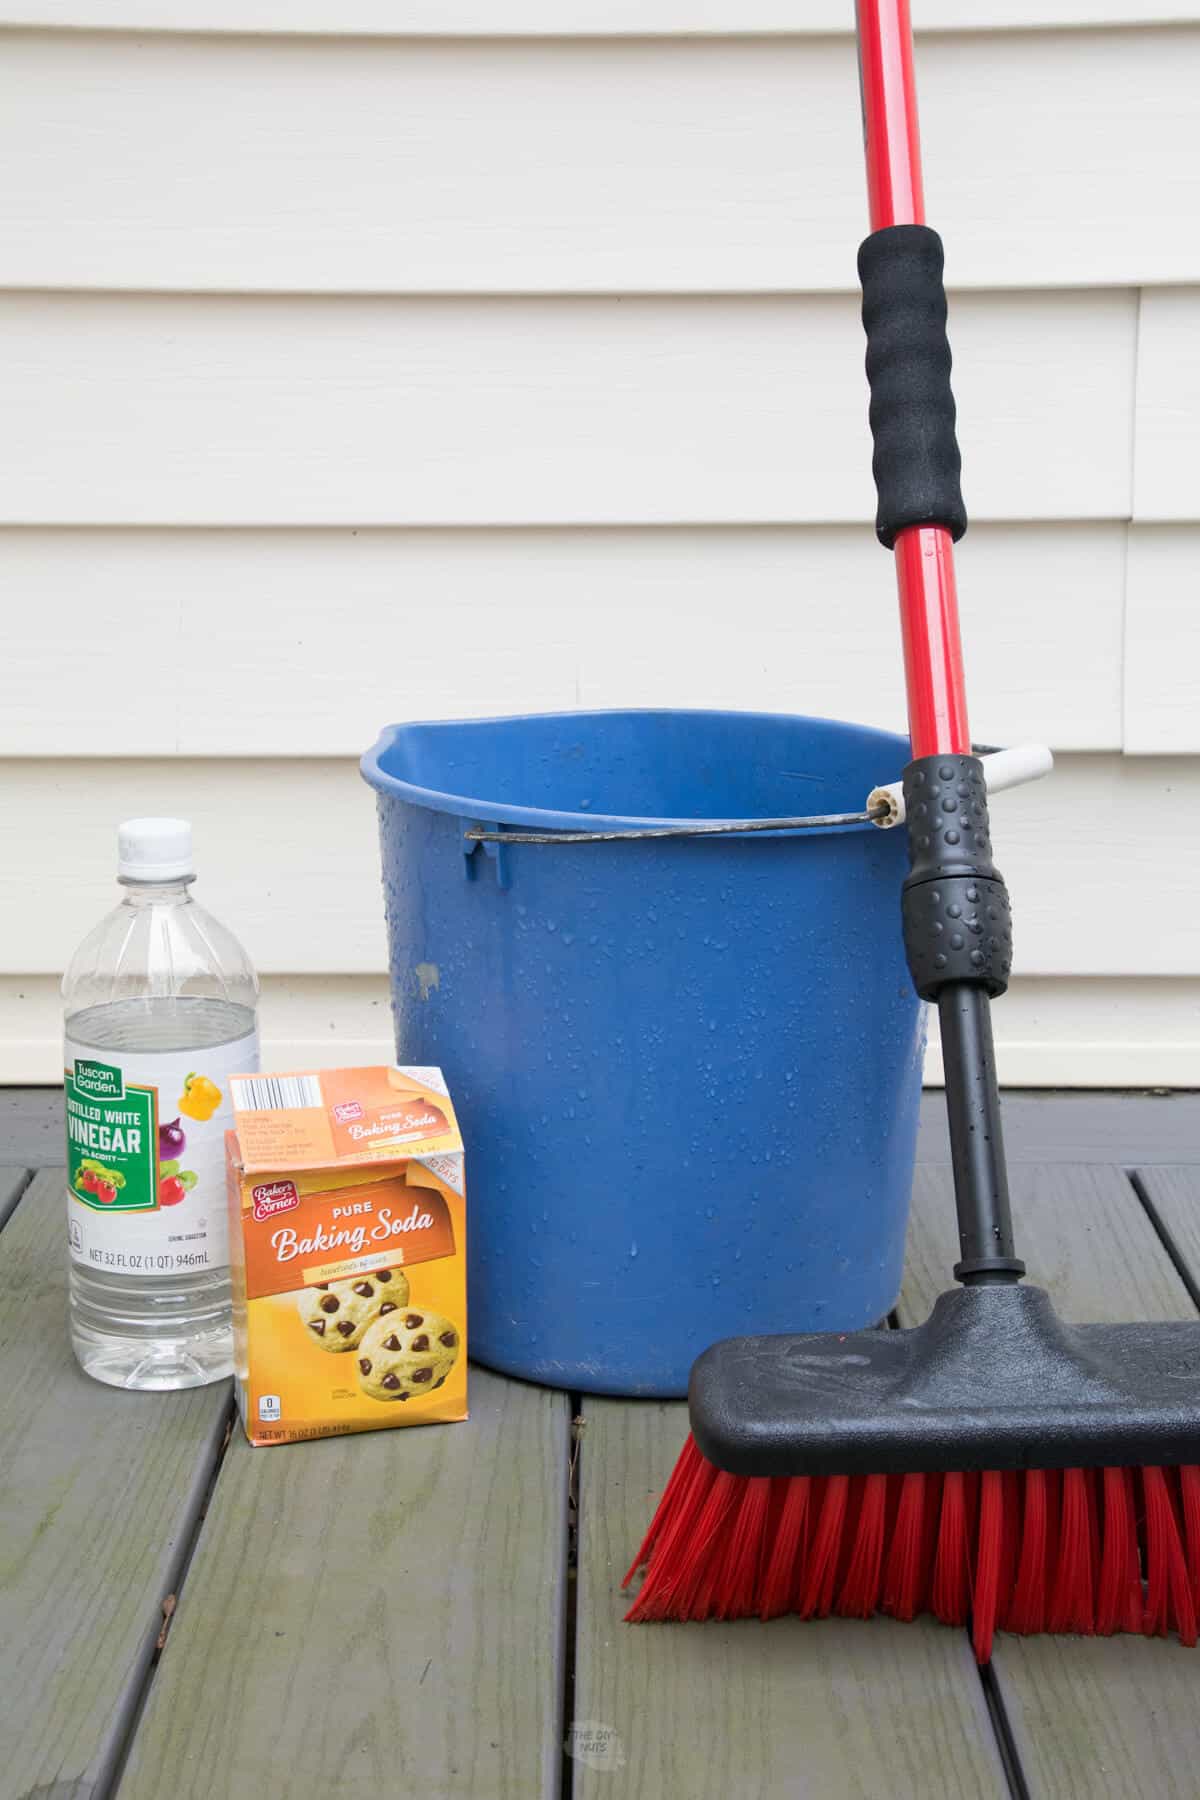 supplies used for composite deck cleaner, vinegar, baking soda, bucket and brush.